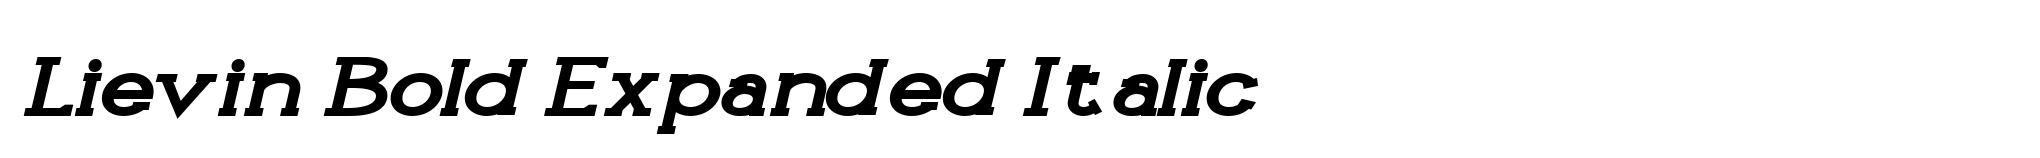 Lievin Bold Expanded Italic image